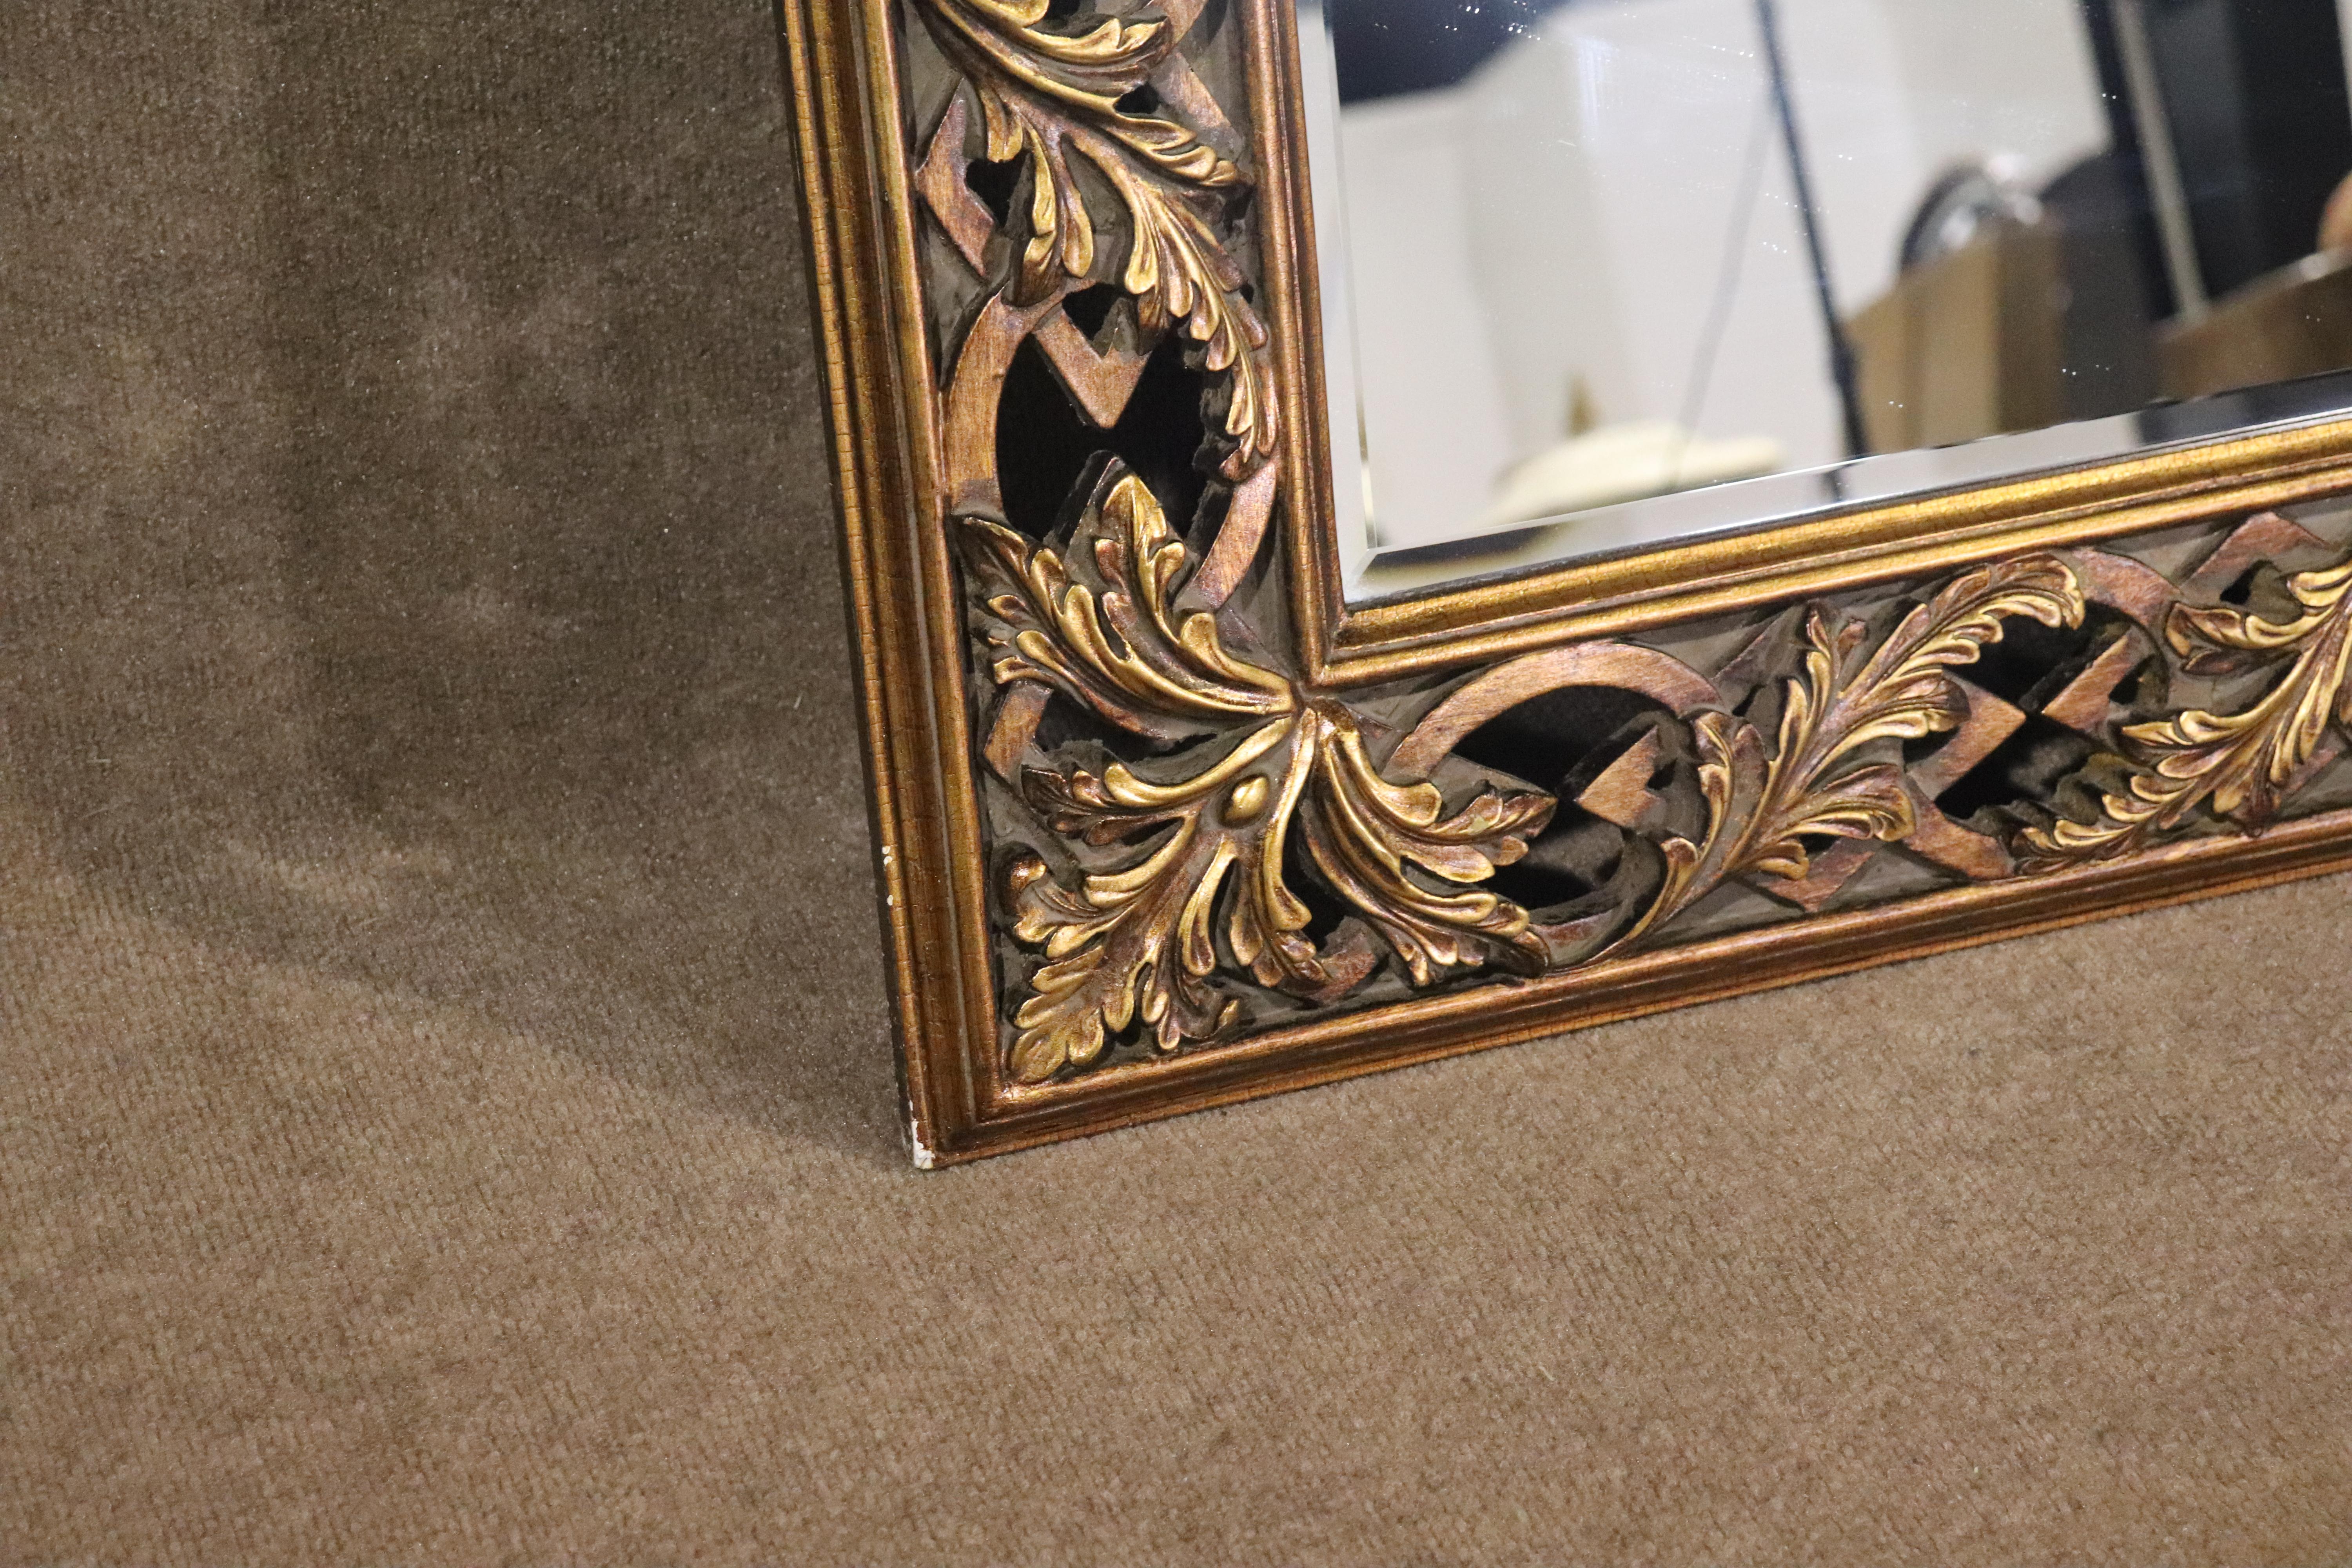 Large wall hanging mirror in a wide carved frame. Mirror is wired to hang vertical or horizontally. 
Please confirm location NY or NJ